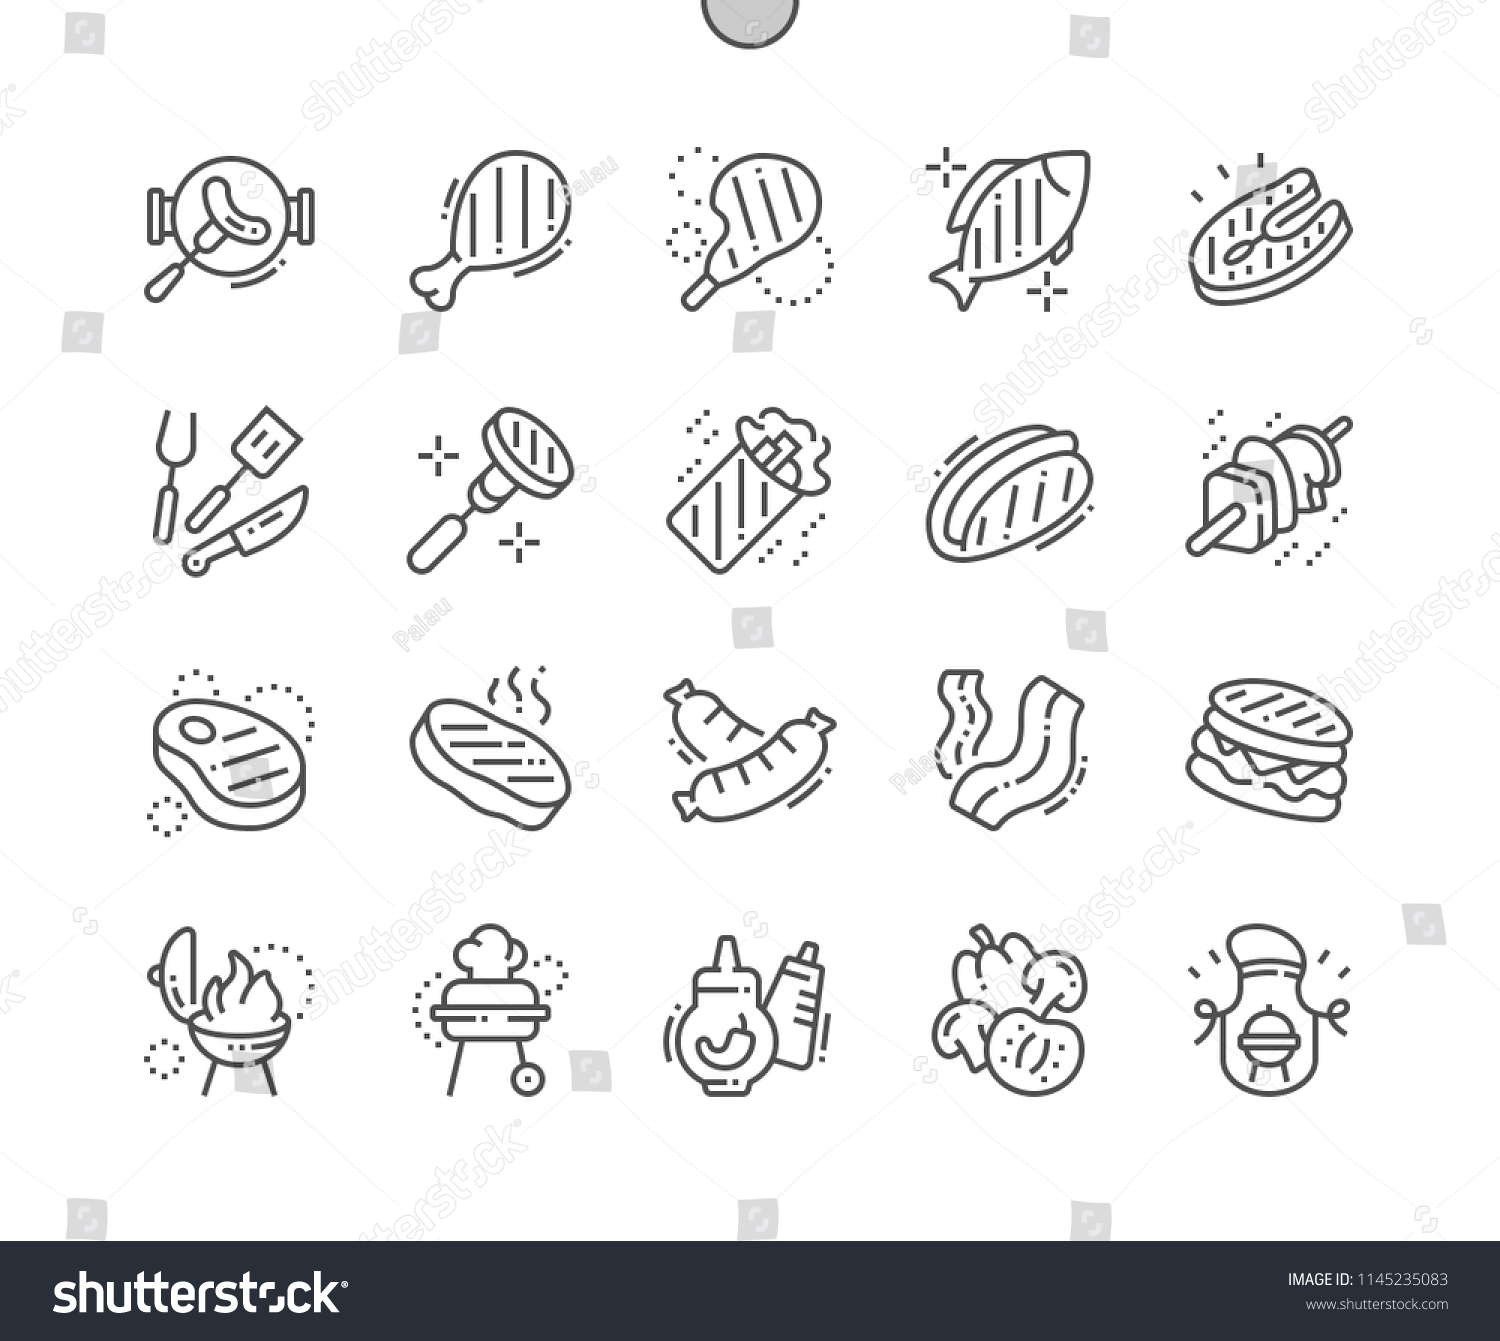 SVG of BBQ 2 Well-crafted Pixel Perfect Vector Thin Line Icons 30 2x Grid for Web Graphics and Apps. Simple Minimal Pictogram svg